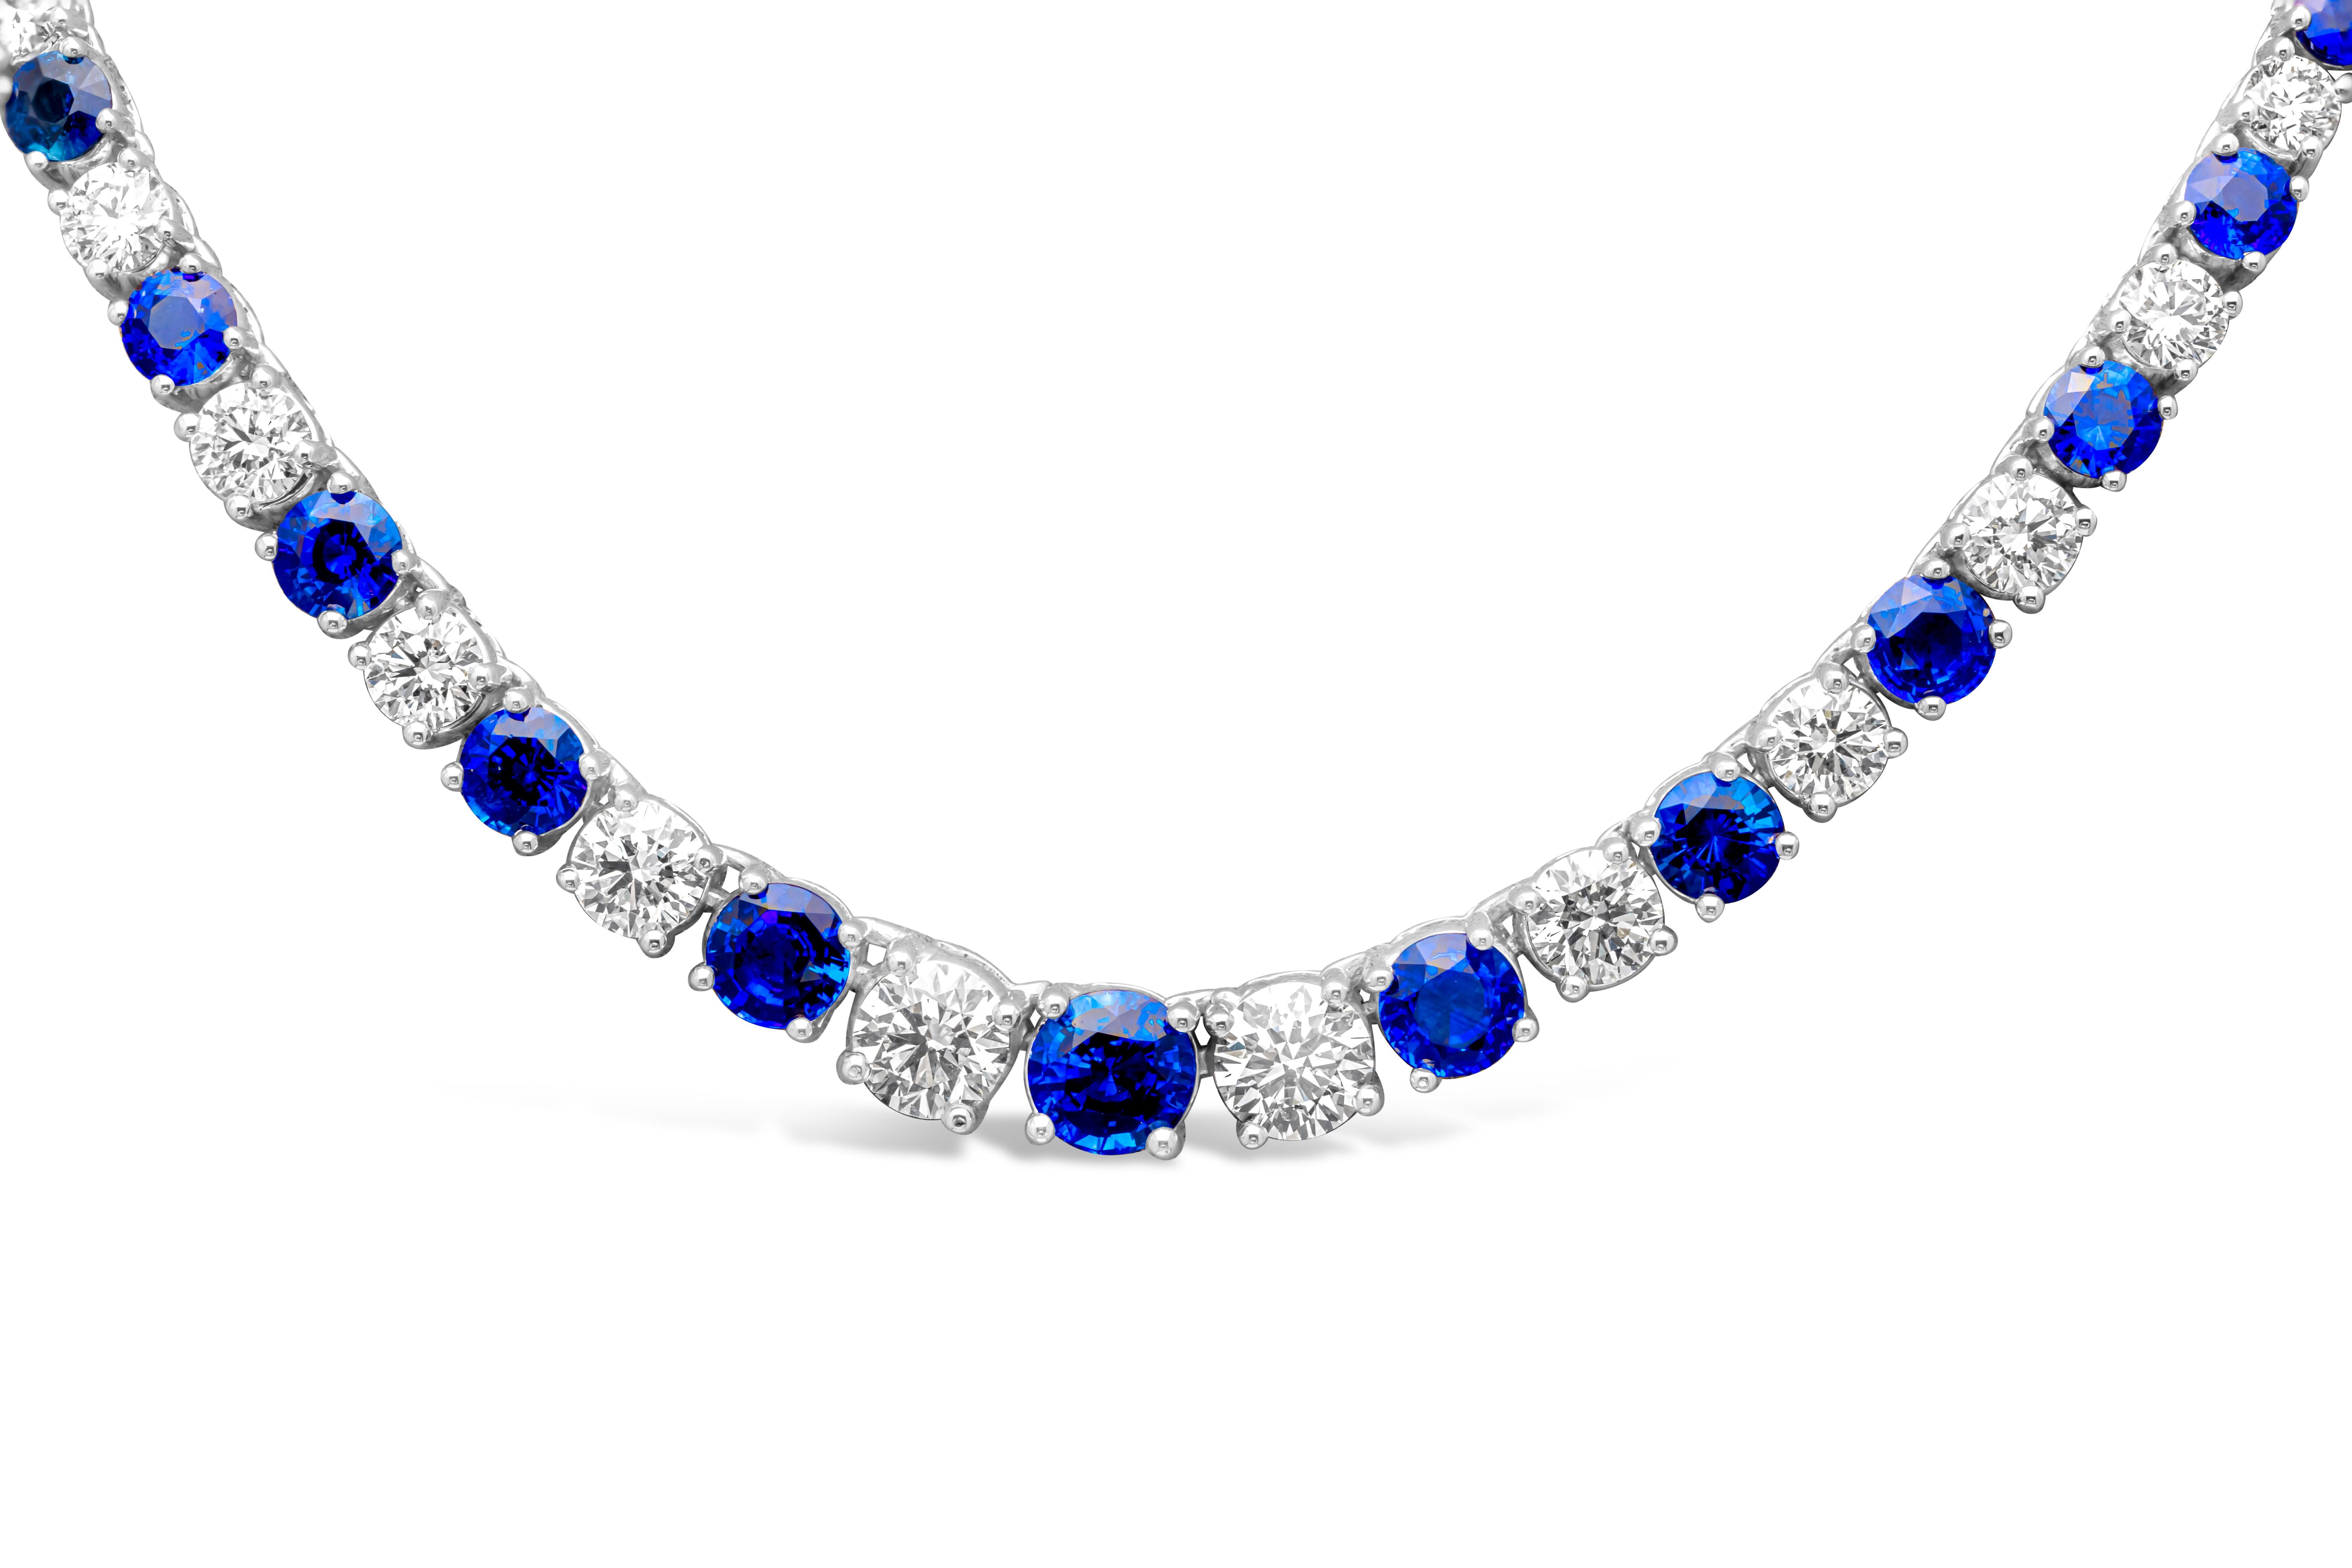 Luxurious and elegantly made riviere tennis necklace showcasing brilliant round blue sapphires and diamonds that elegantly alternate with each other and get larger to the center of the necklace. Set in a classic four prong basket setting. Blue